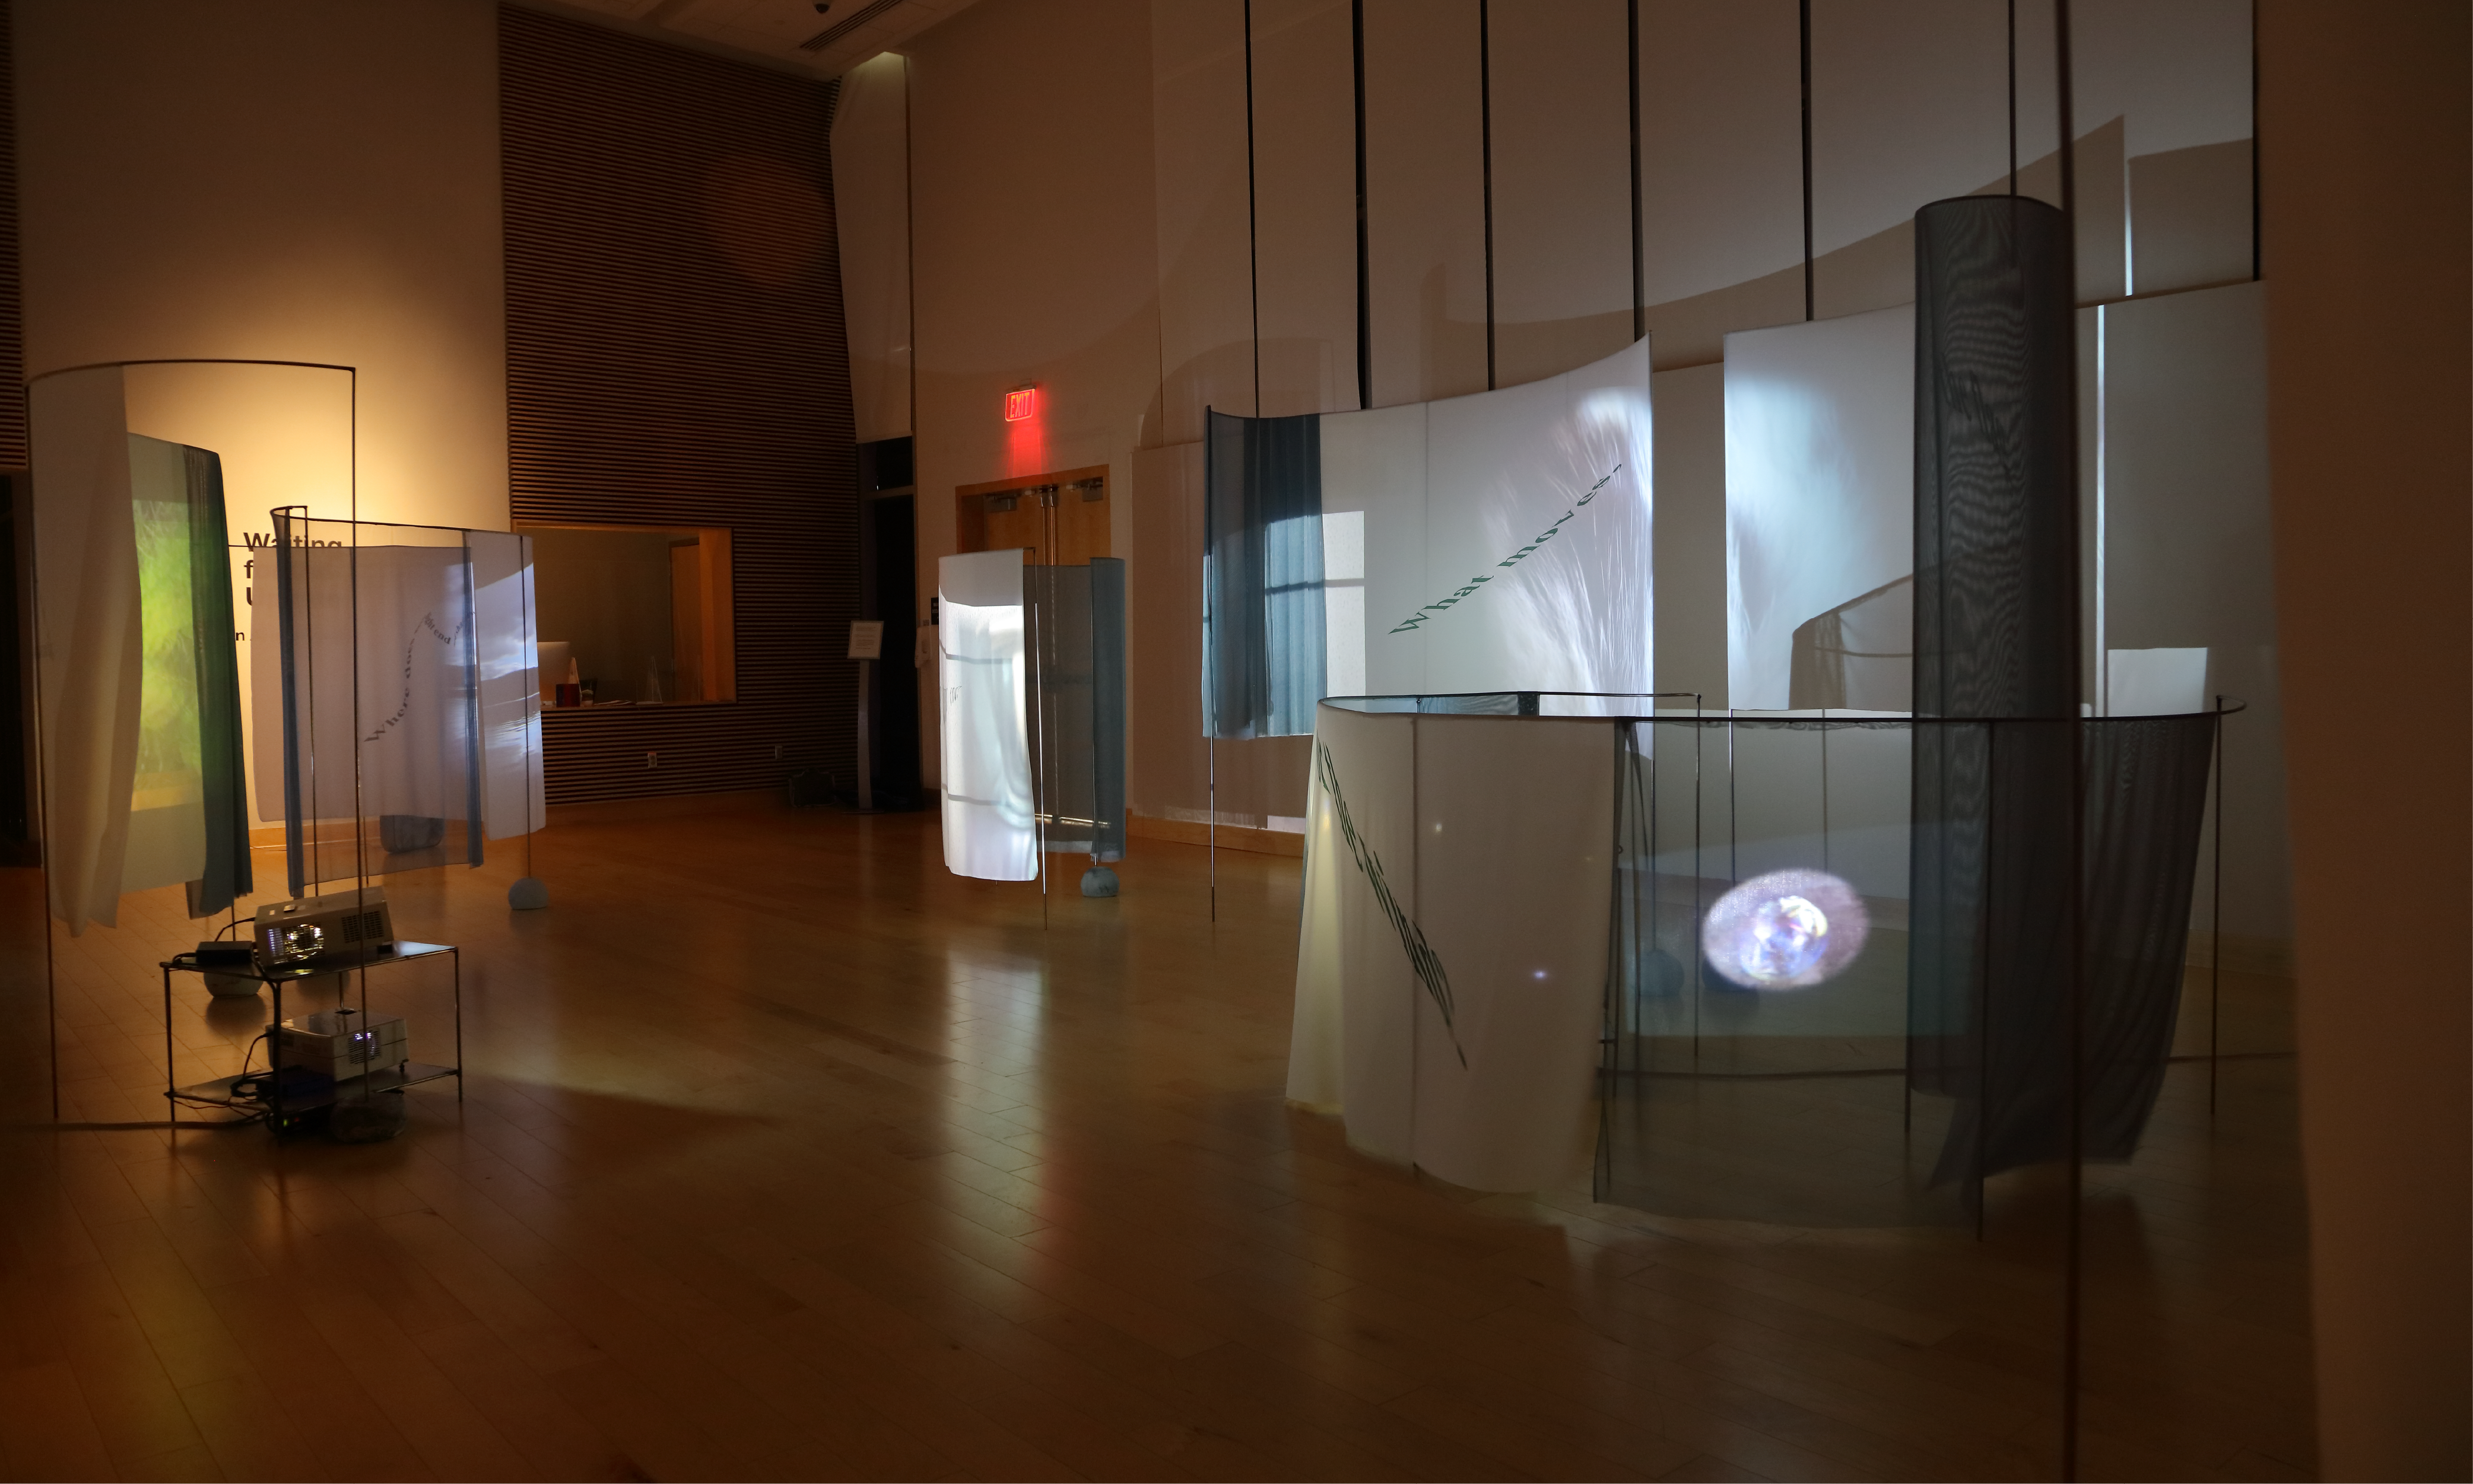 A view of the front of the gallery photographed from the back left corner. Several projection screens and a projector.